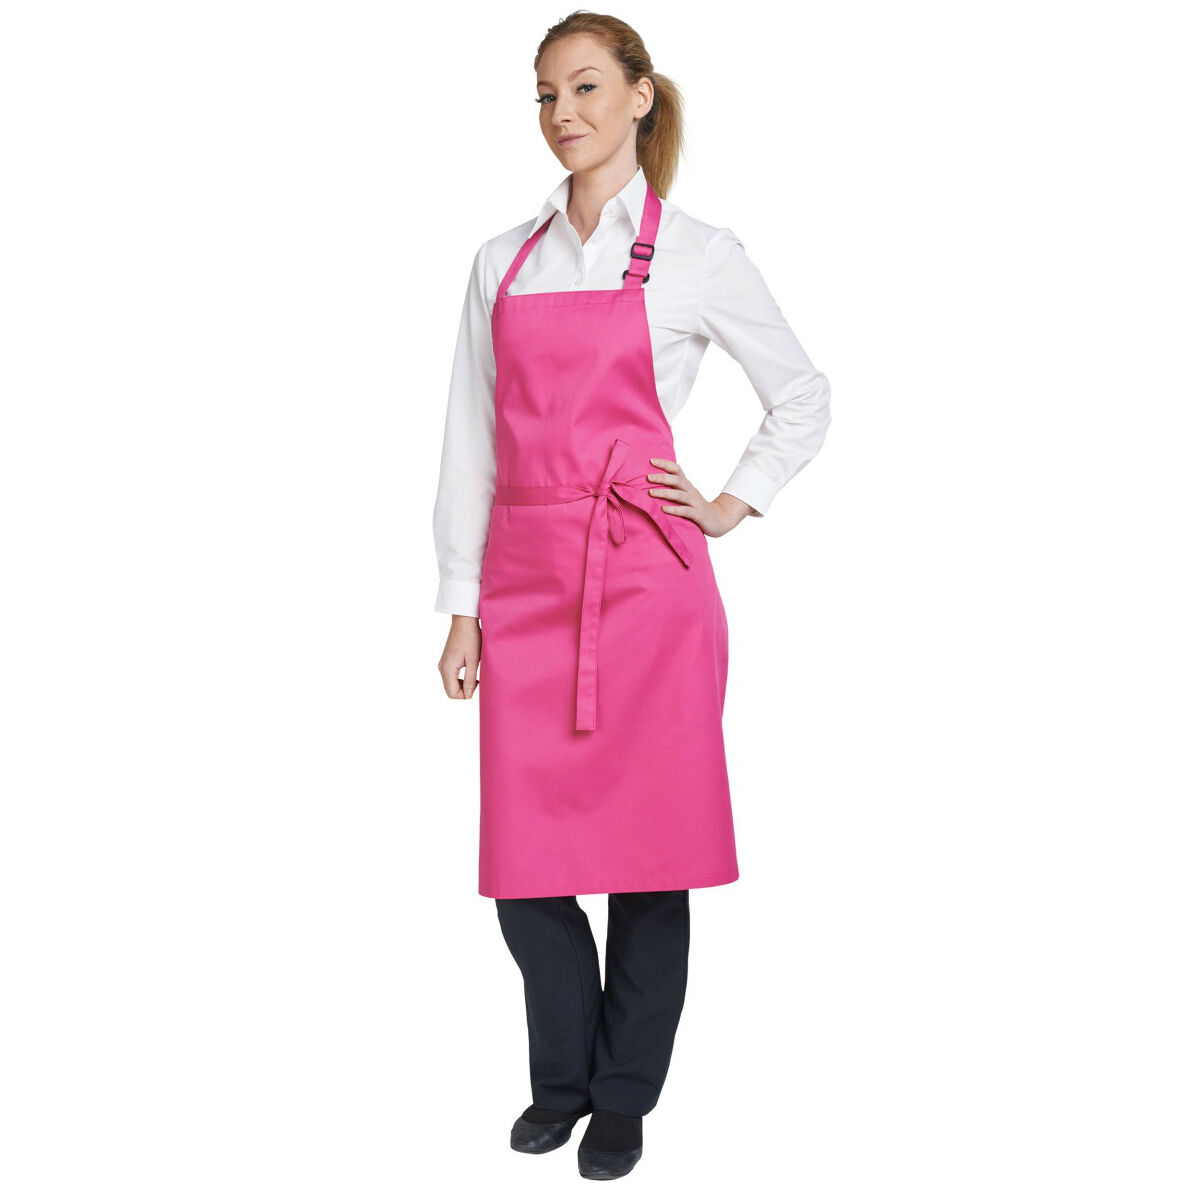 Dennys Multi-Coloured Recycled Apron